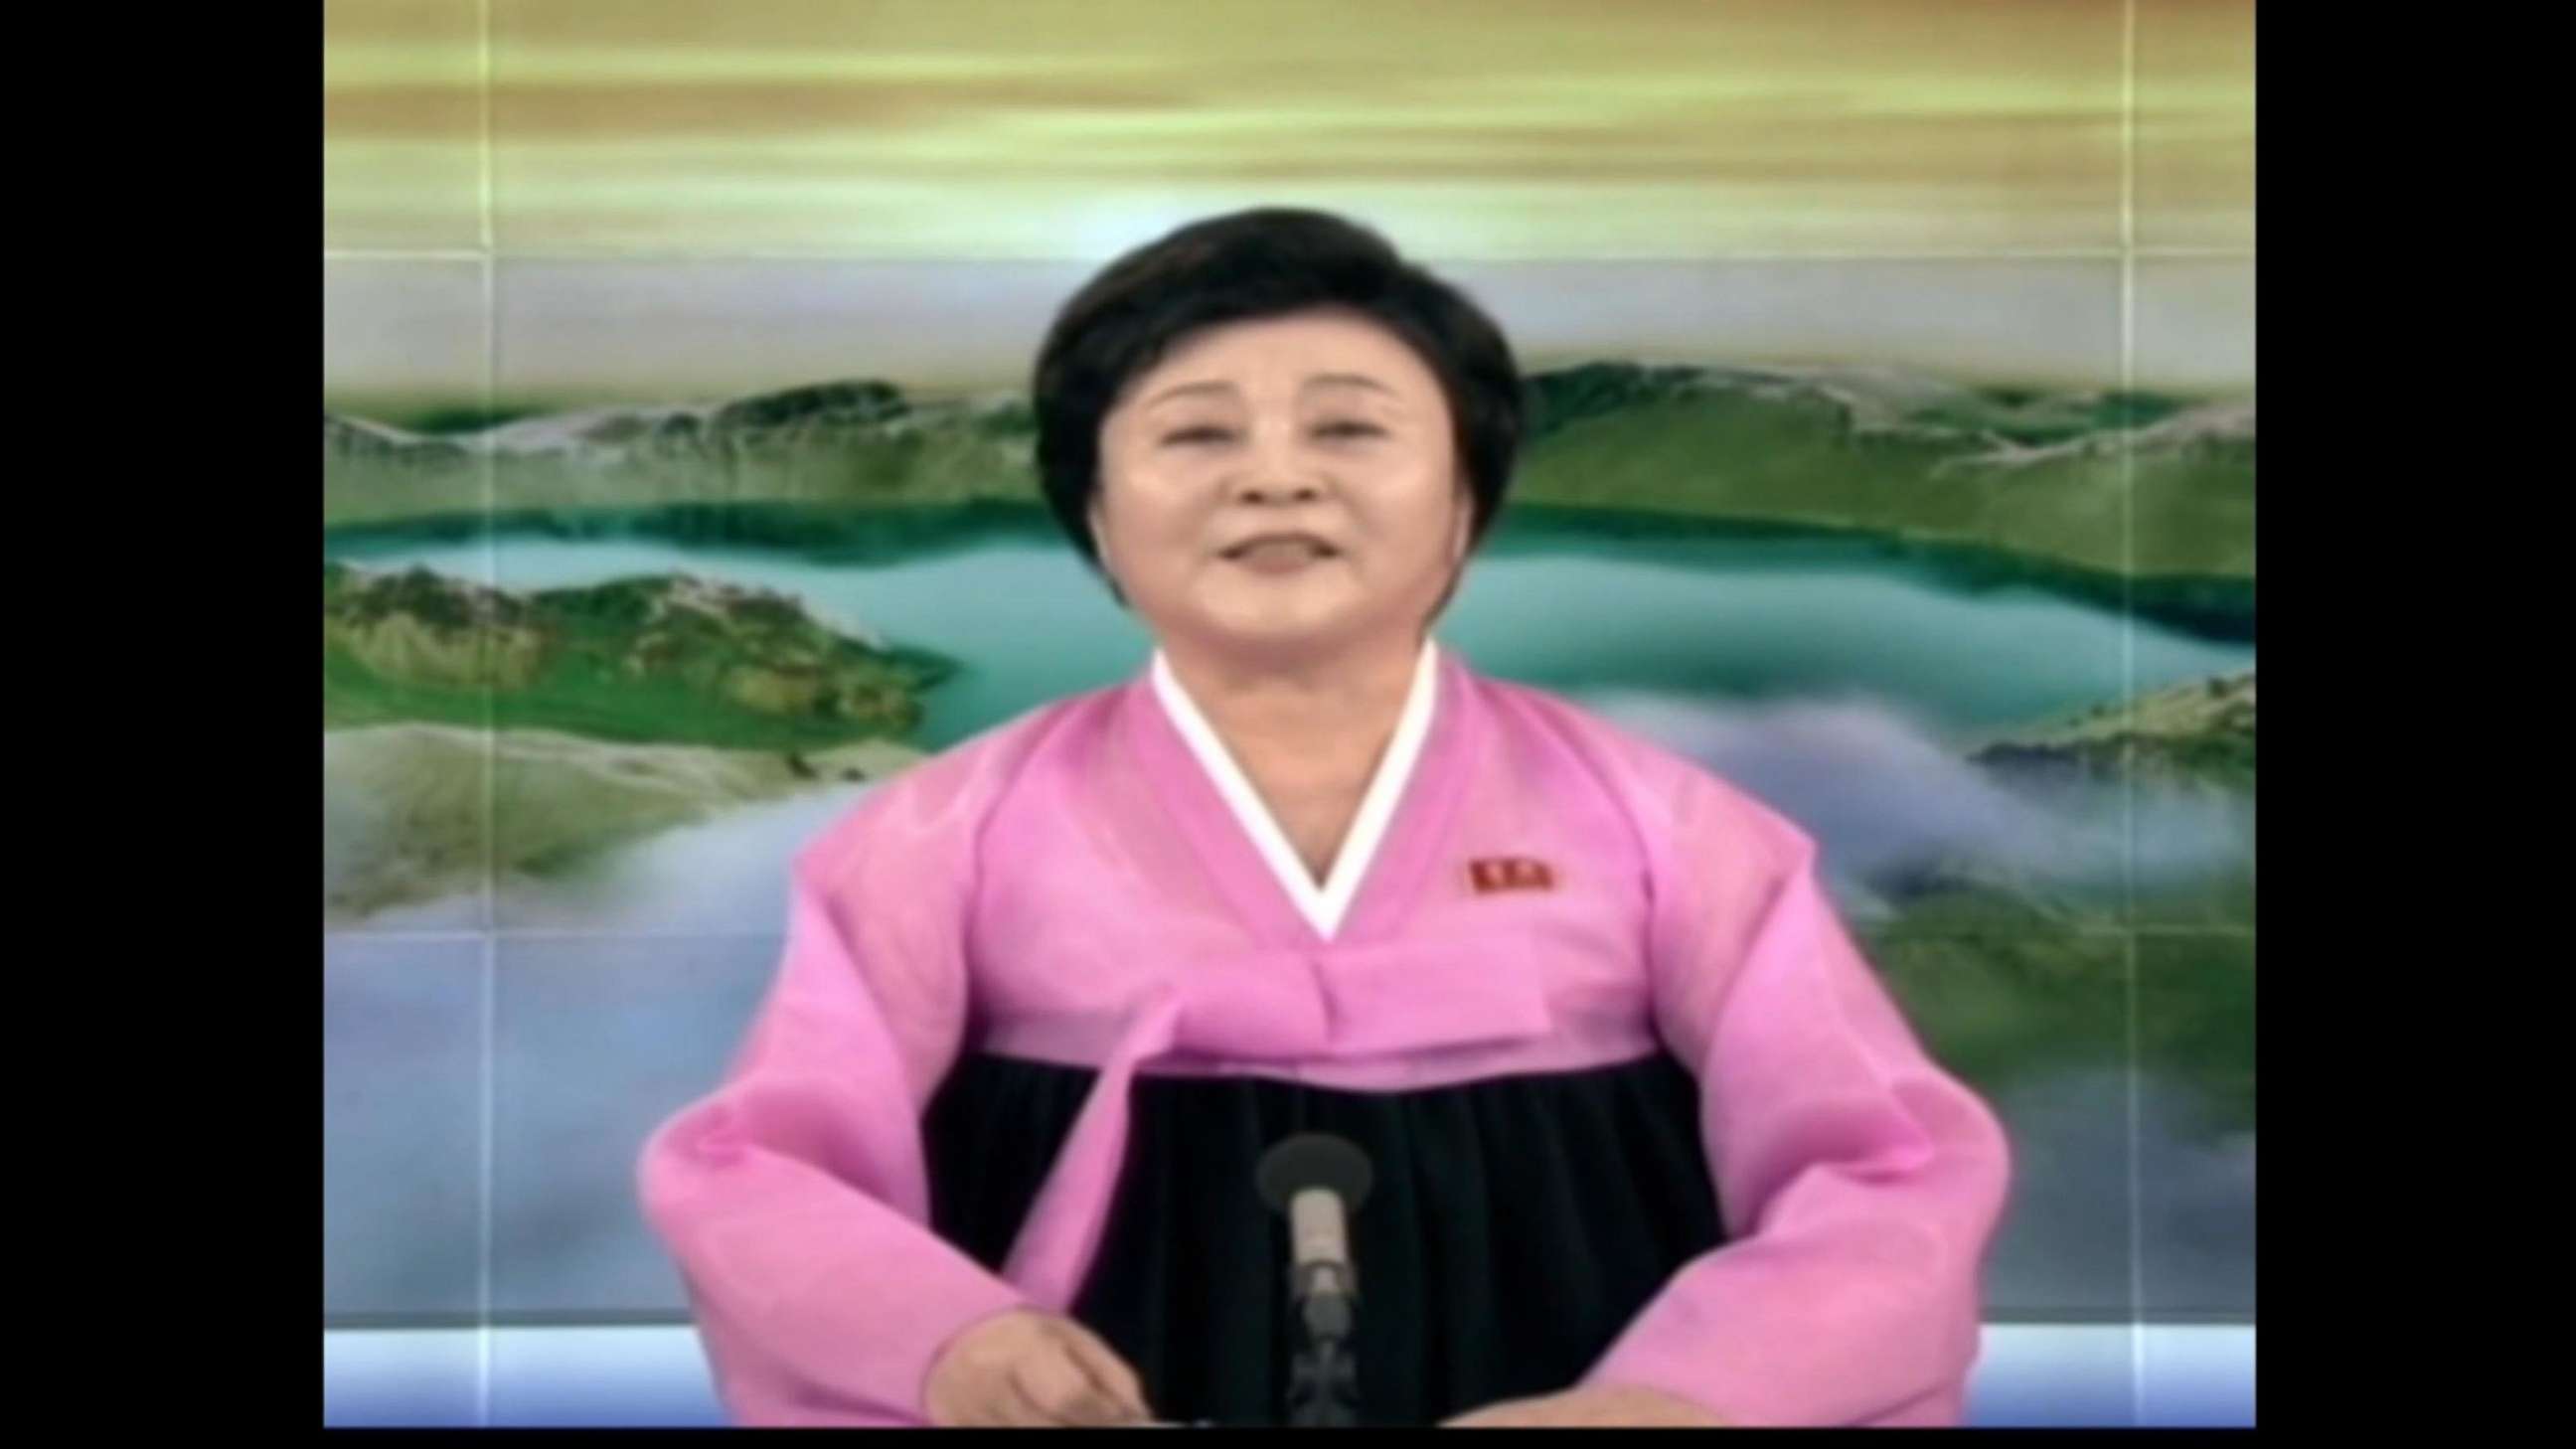 PHOTO: A North Korean TV anchor reports on the meeeting of U.S. Secretary of State Mike Pompeo and North Korean President Kim Jong Un, May 9, 2018.  